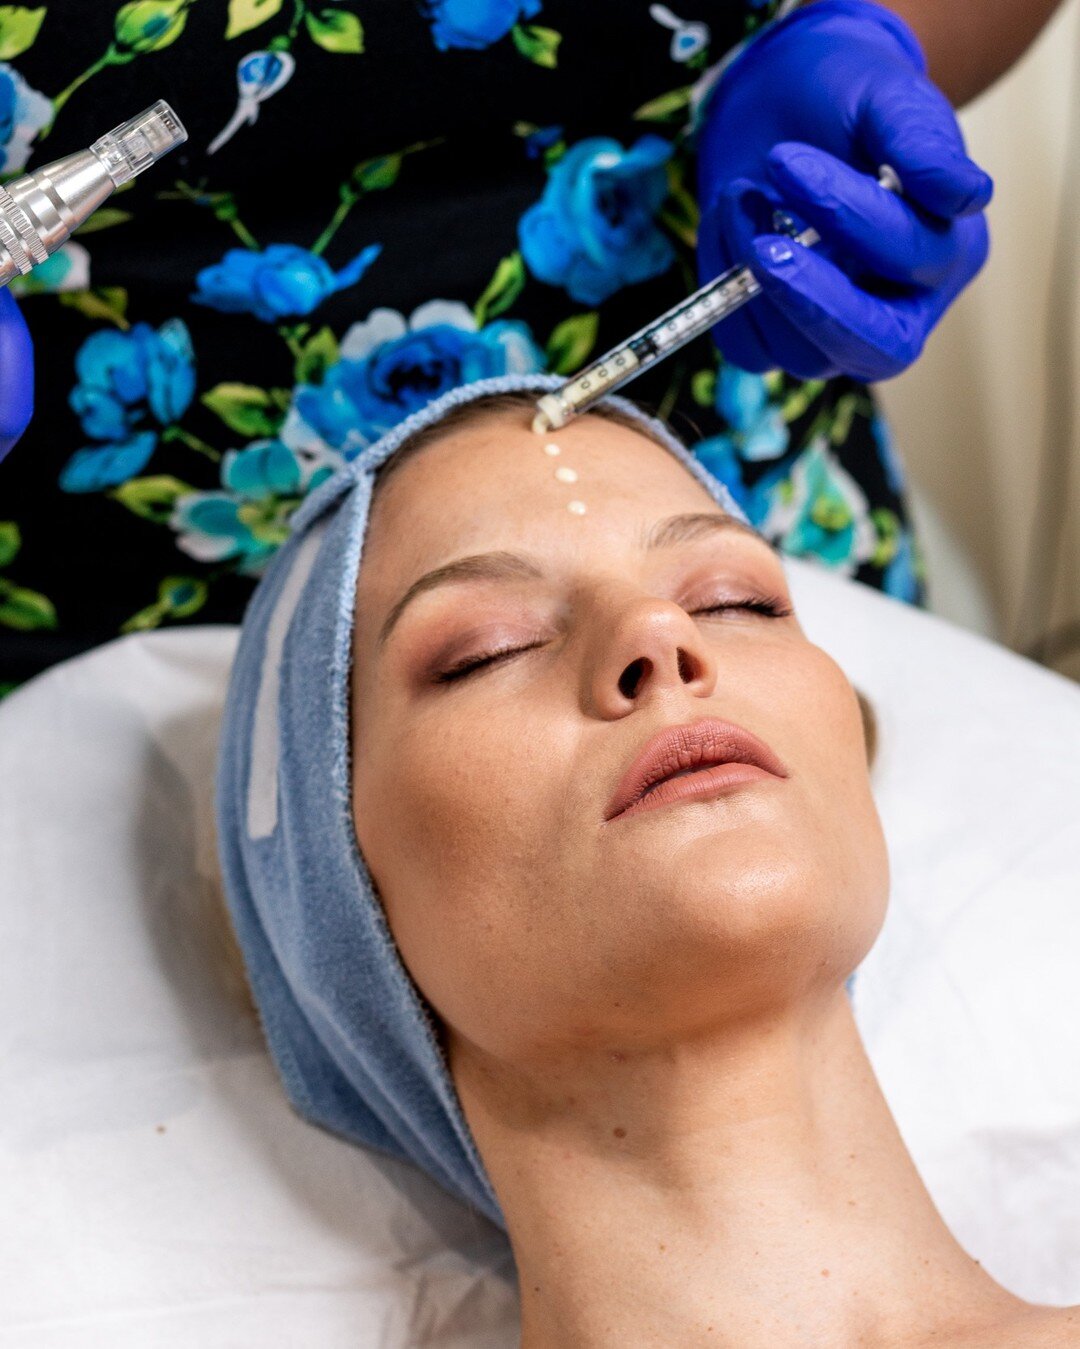 Our winter microneedling promotion ends soon! Book today and get 15% off any microneedling treatment including Anti-Ageing, Scarring, Acne &amp; Pigmentation.

https://www.worldoffaces.co.za/treatment-menu

#Winter #Promo #Microneedling